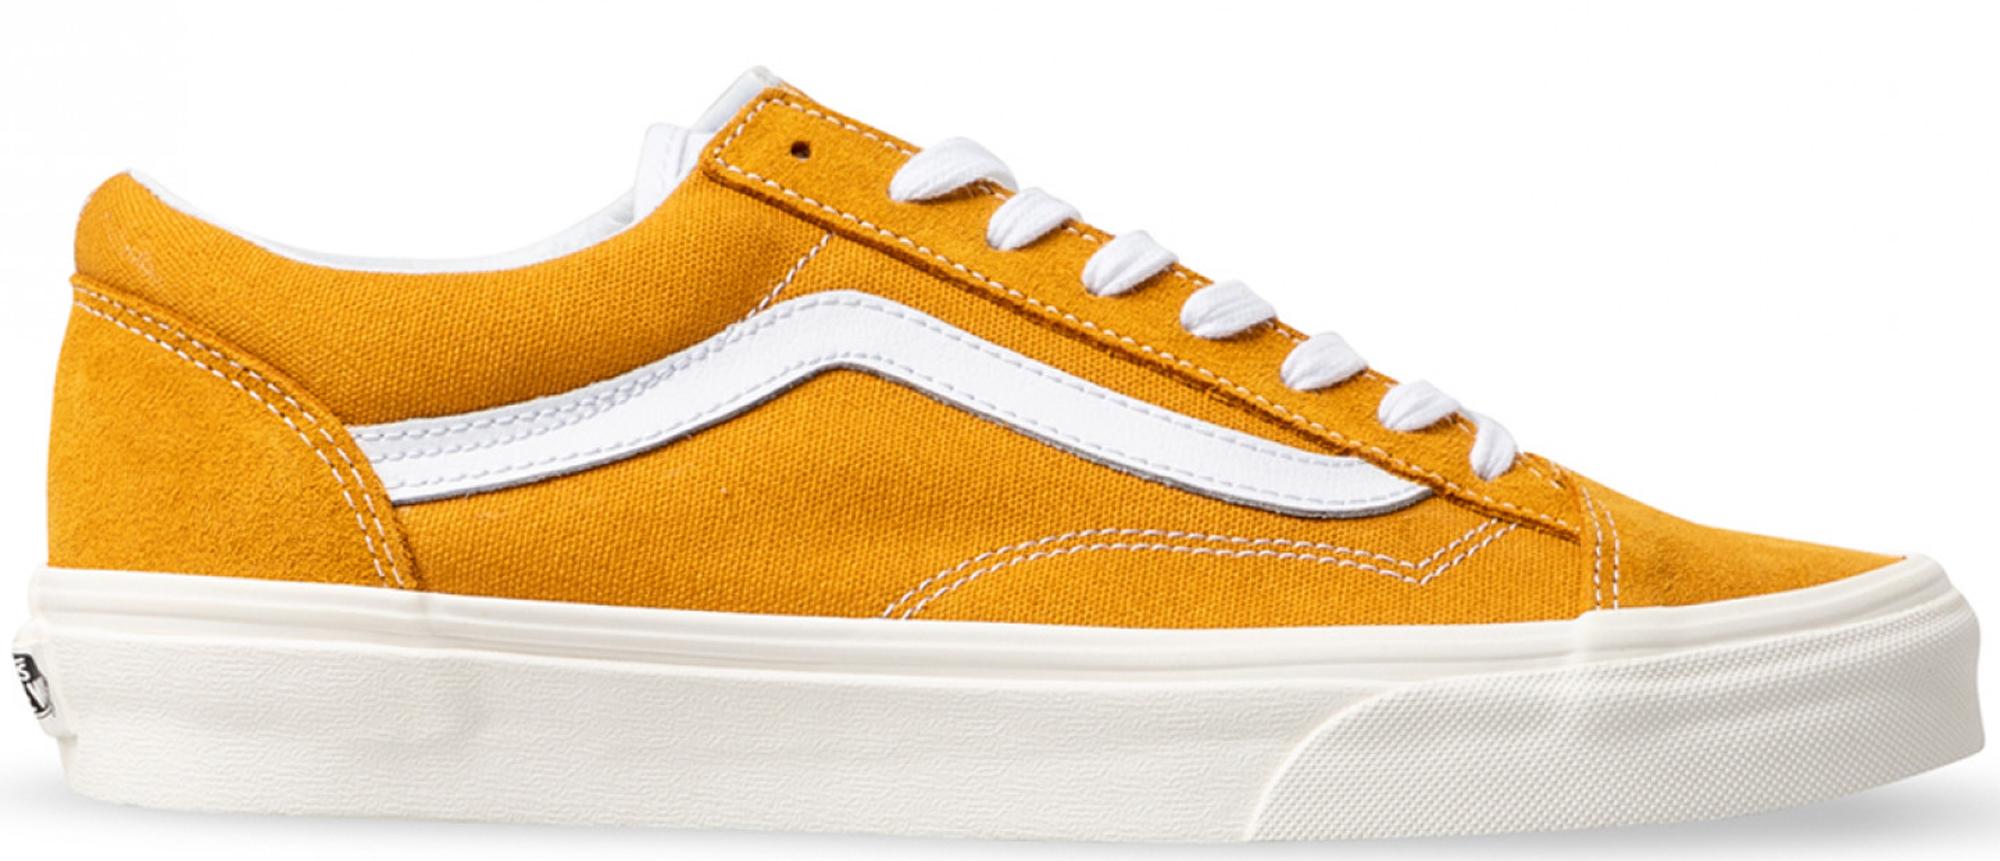 Vans Style 36 Sunflower in Yellow for 